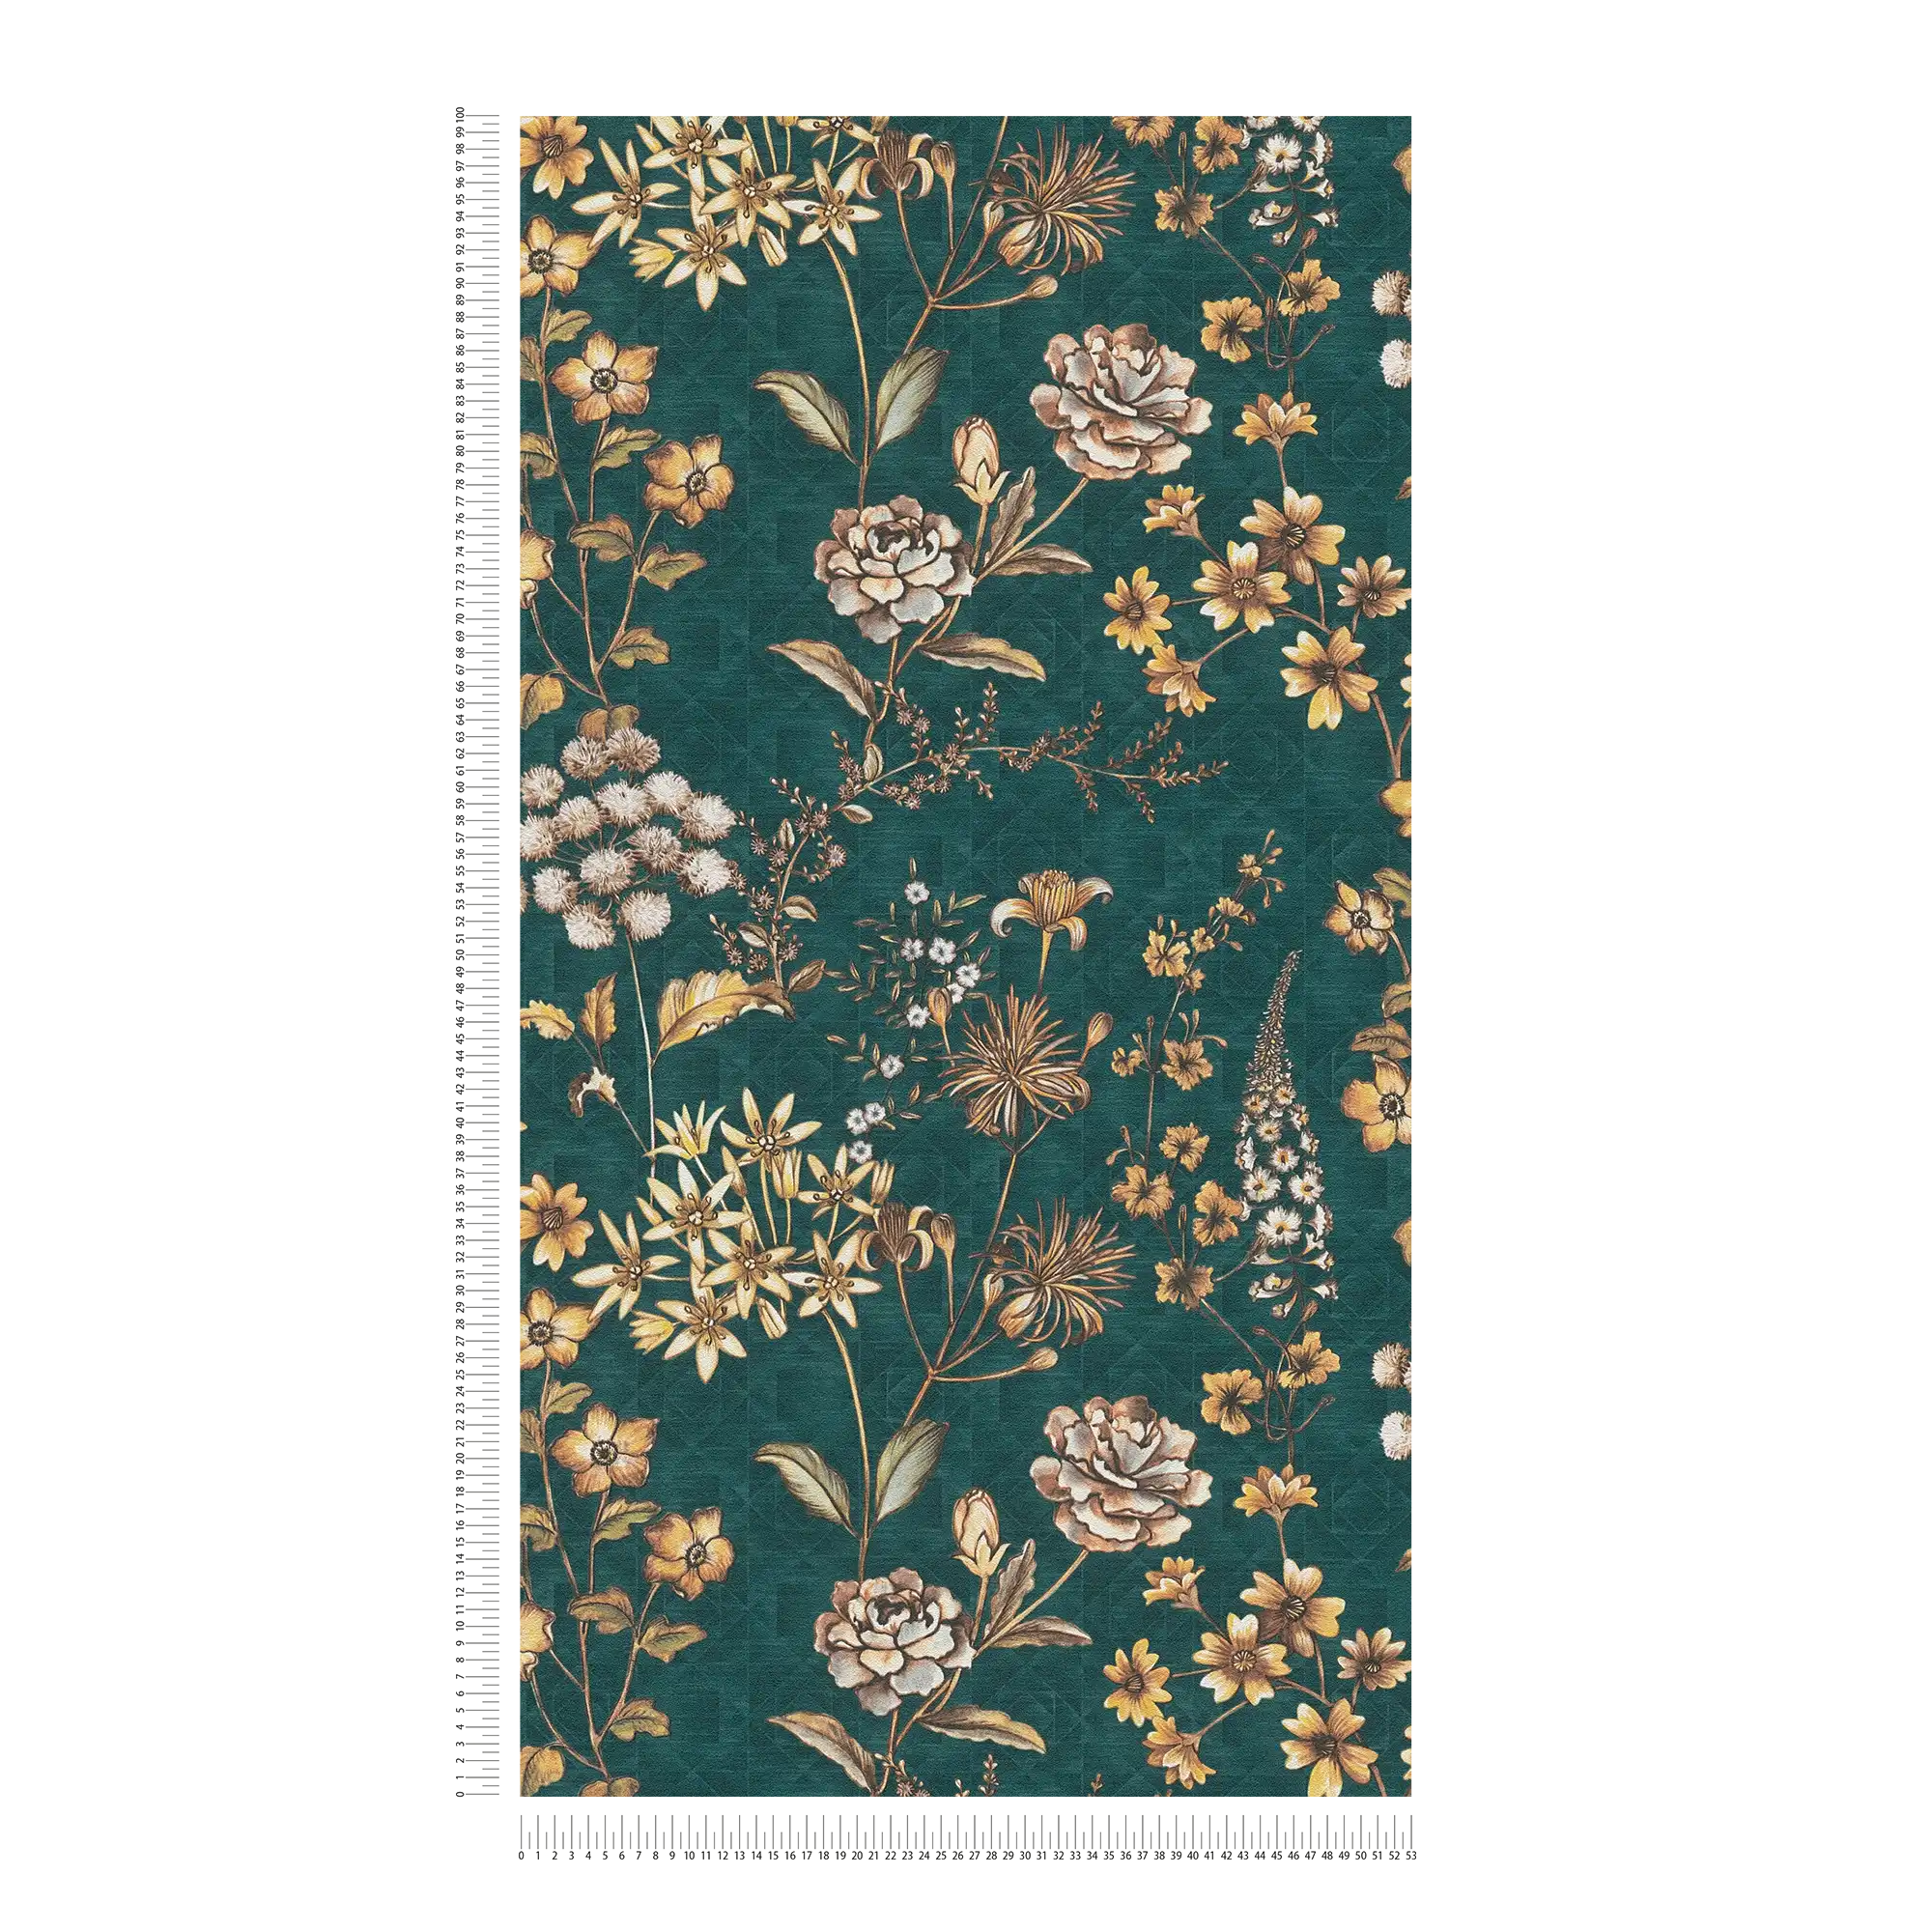             Floral non-woven wallpaper with floral pattern on graphic background - petrol, orange, yellow
        